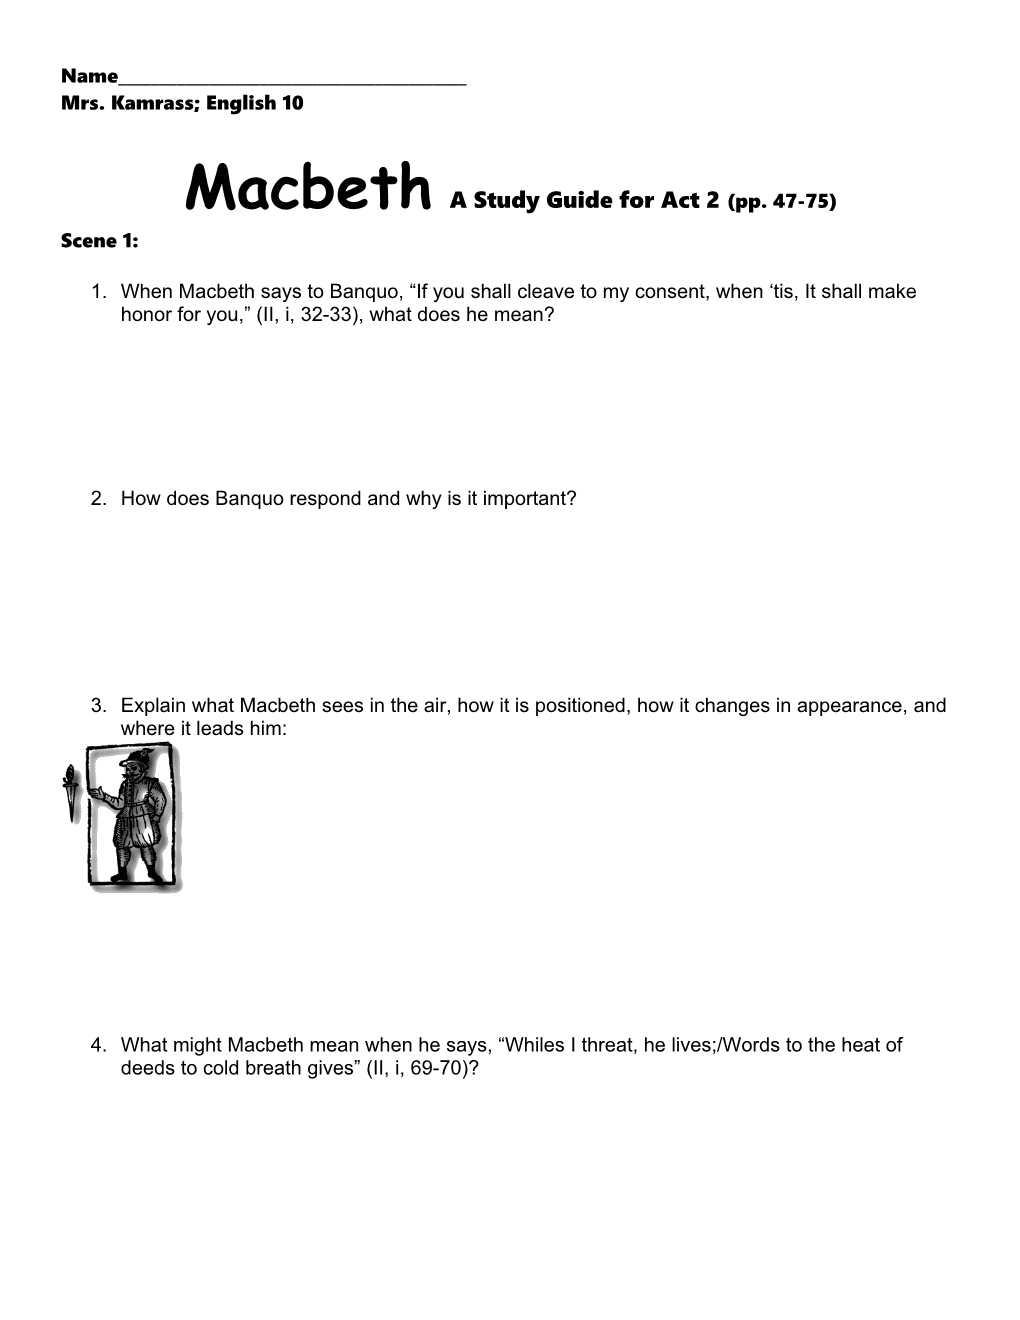 Macbetha Study Guide for Act 2 (Pp. 47-75)